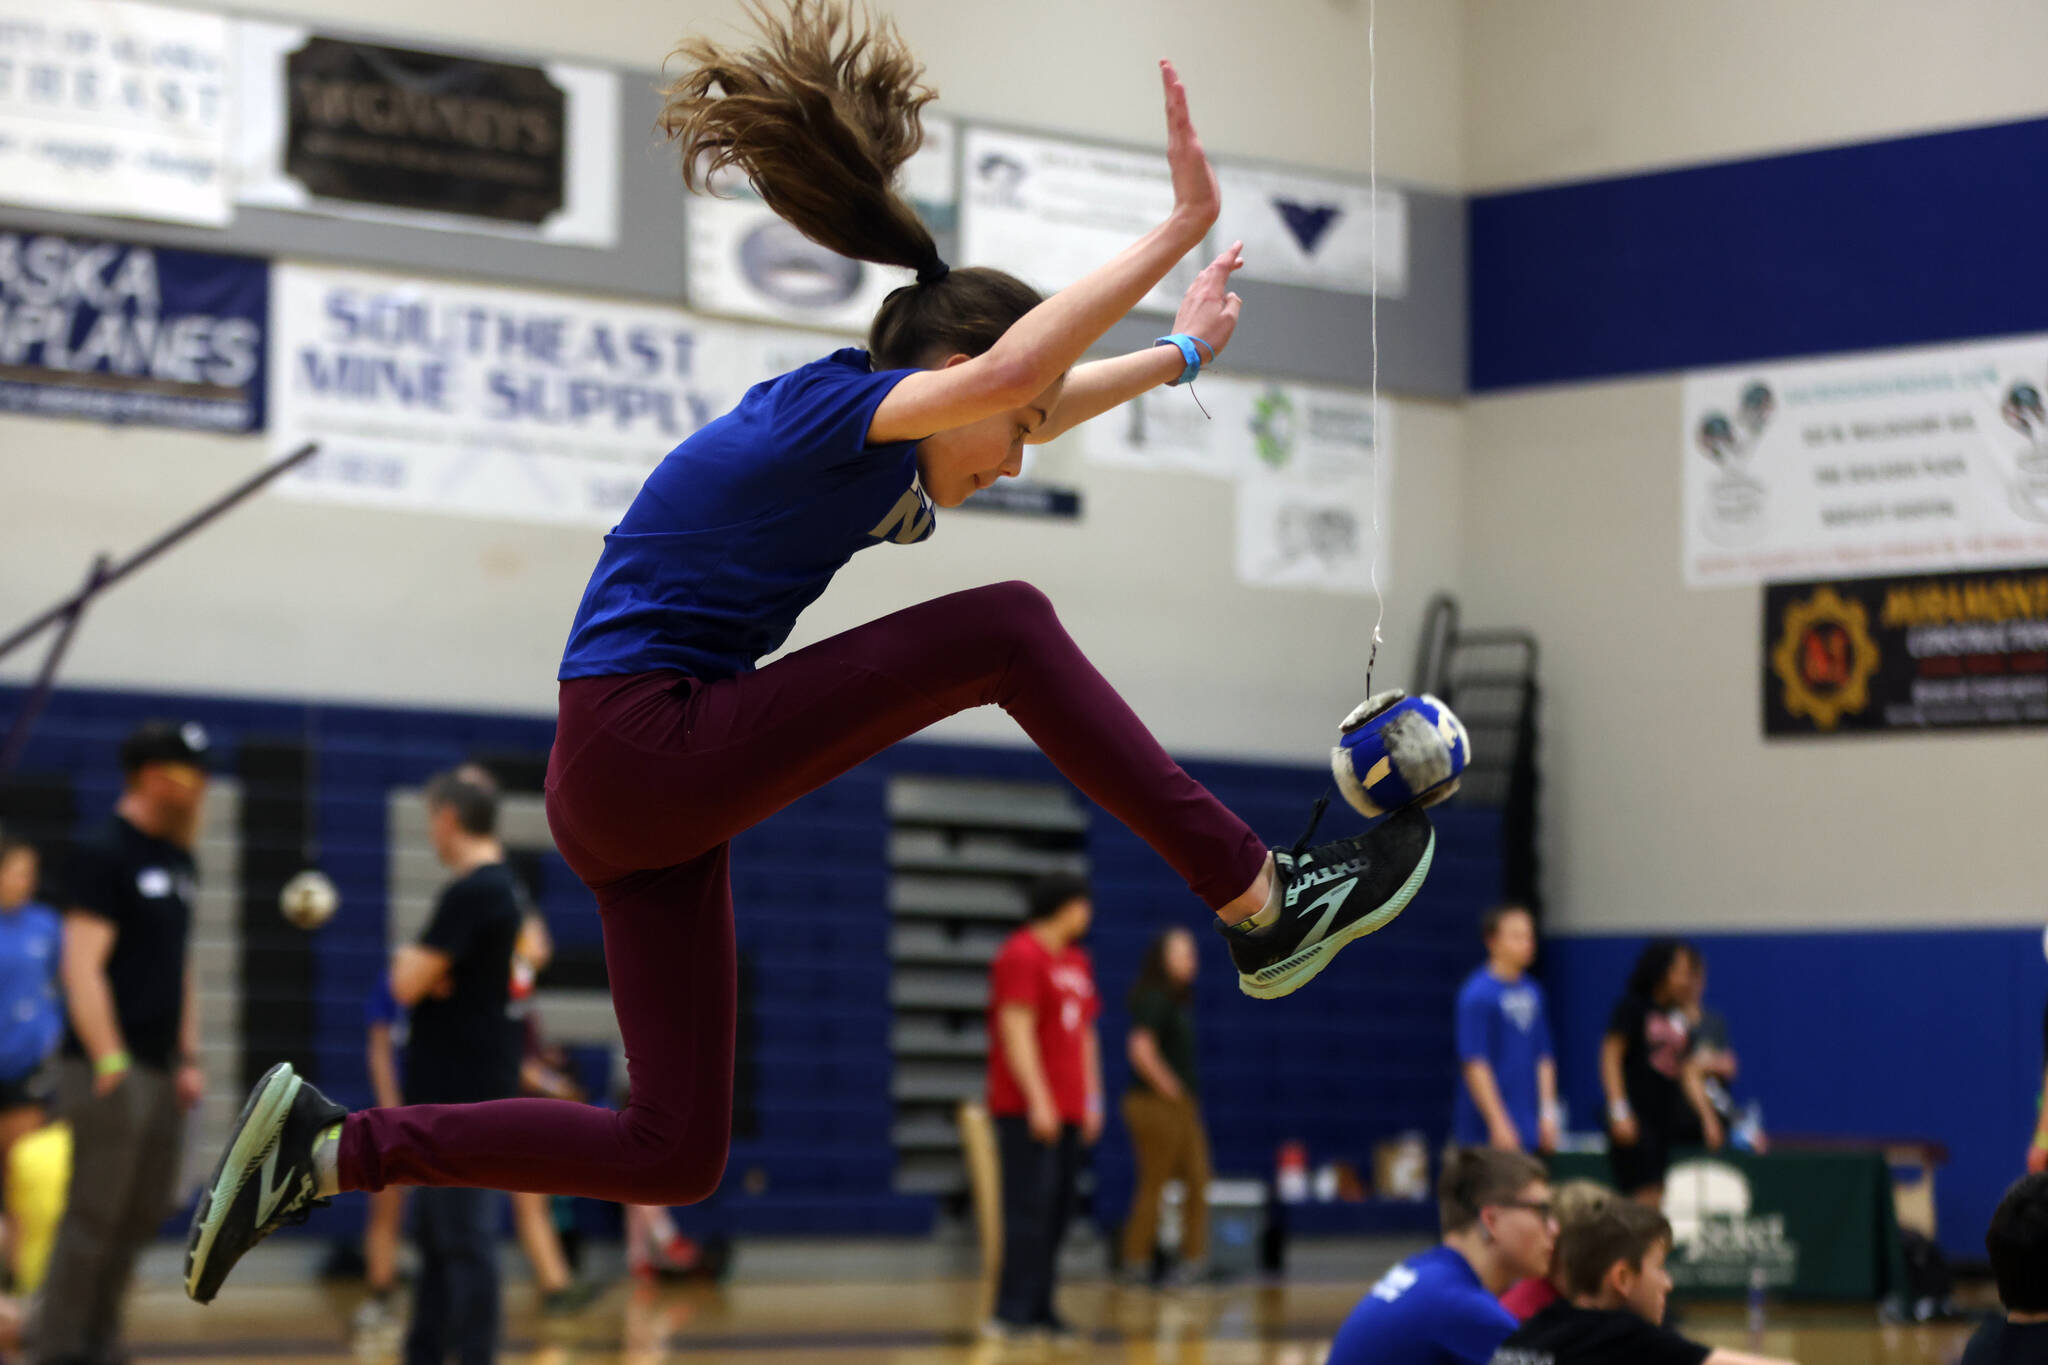 Madelyn Dreischbach, 13, jumps up to connect with the ball during the one-foot high kick event at this year’s Traditional Games. (Ben Hohenstatt / Juneau Empire)